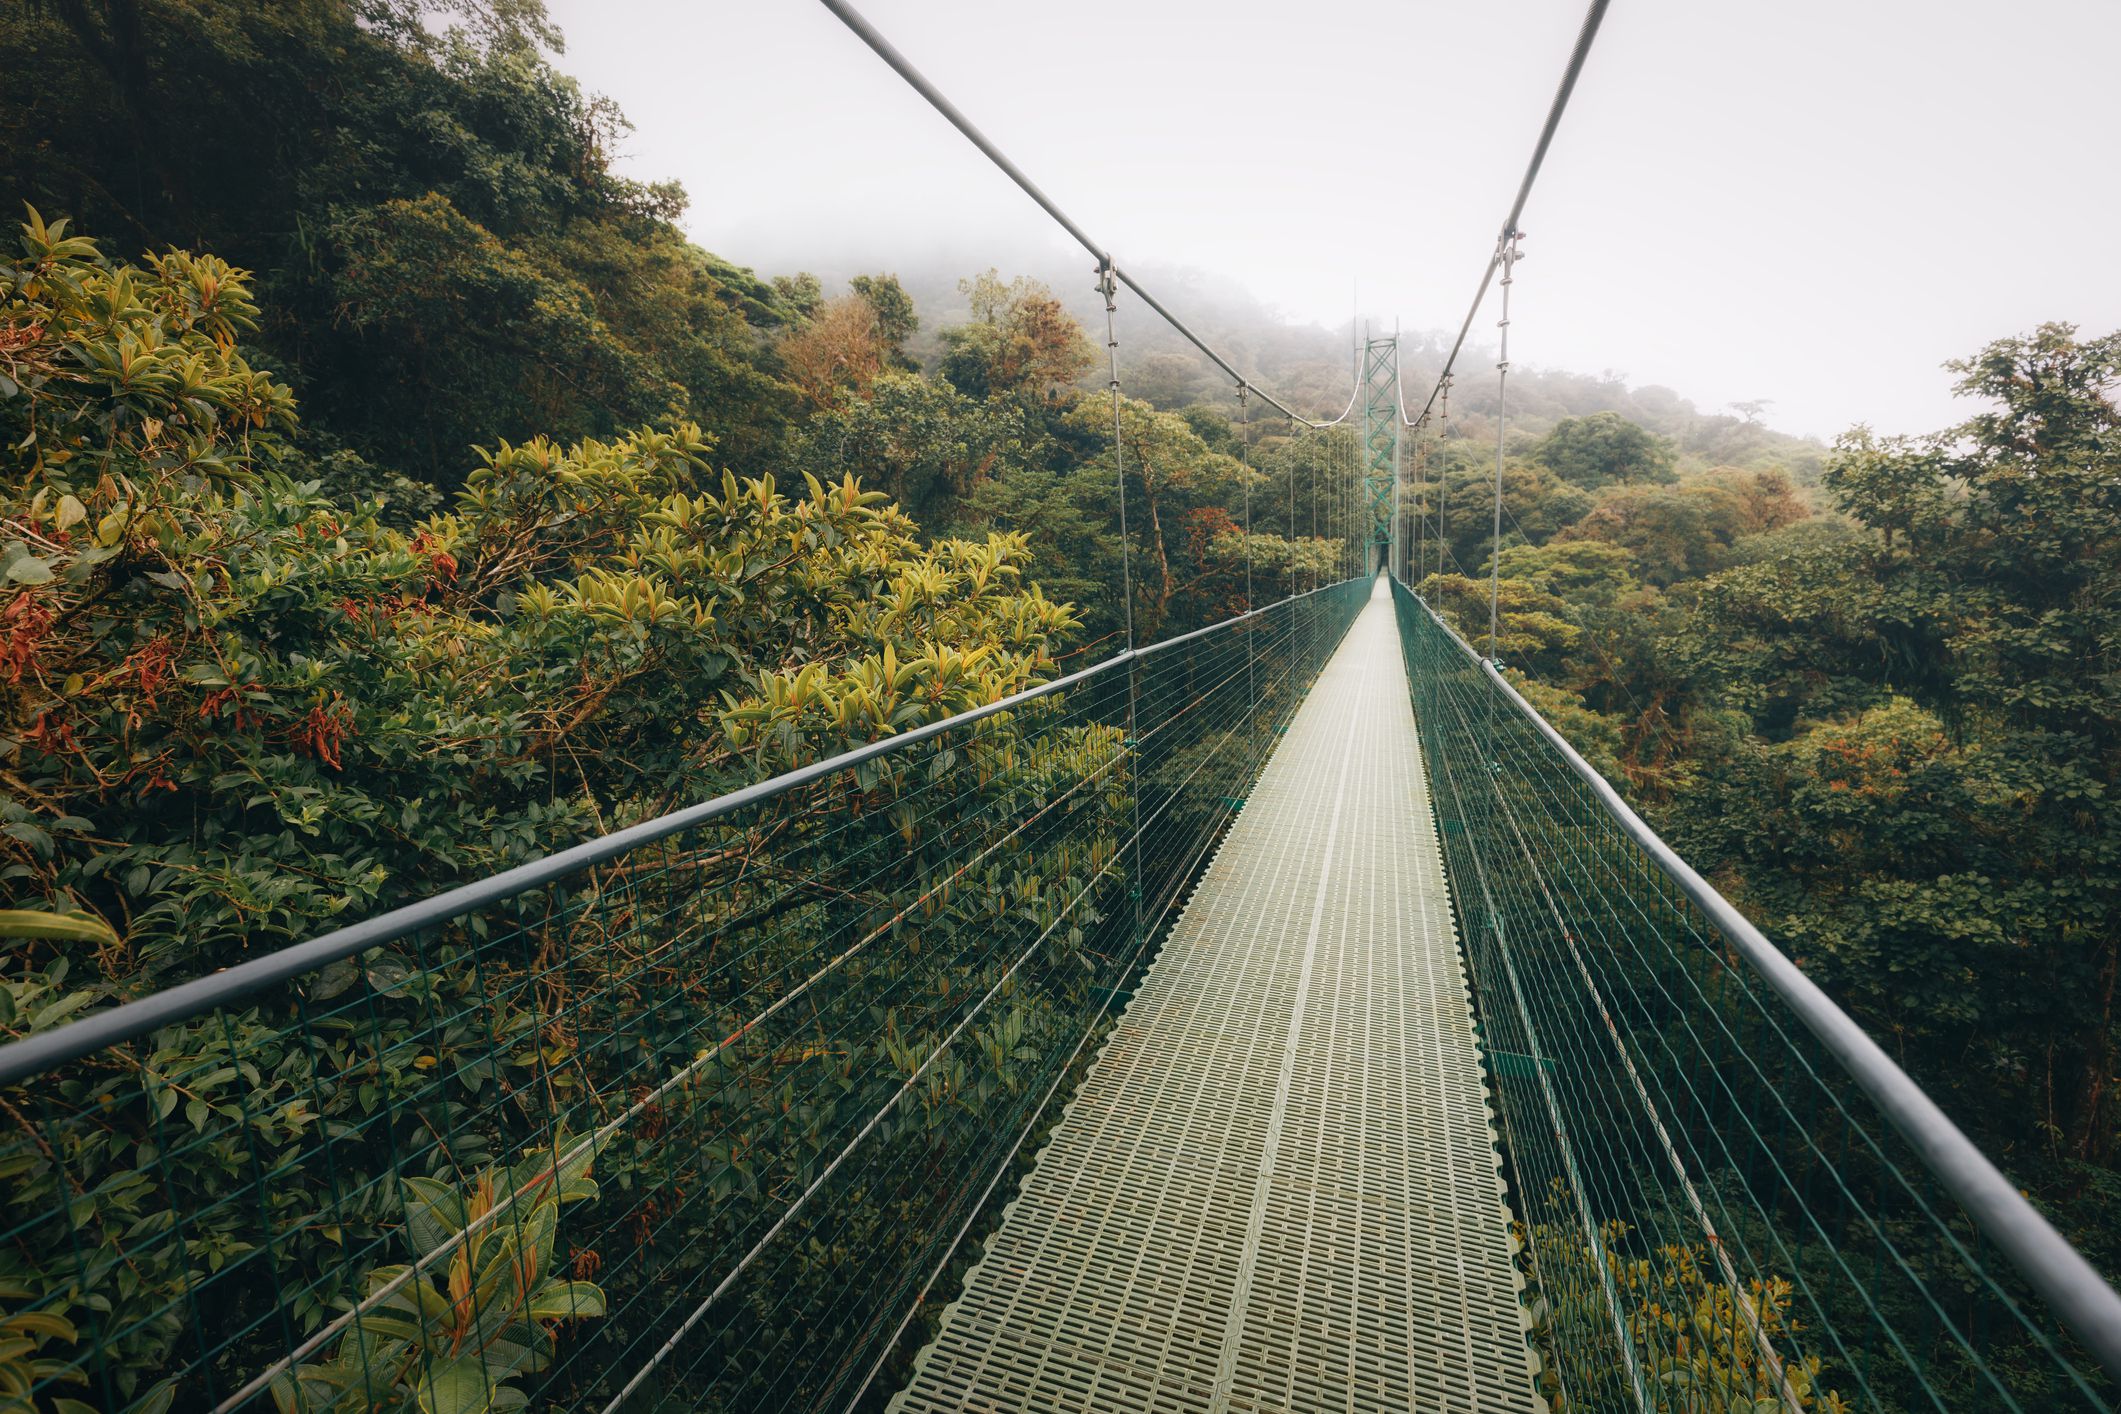 <p>Looking for fun things to do in Costa Rica? This list was developed by scouring online forums, review sites, and travel guides to formulate the top 10 things you should do in Costa Rica. Plus, there’s advice from savvy travelers who’ve explored the country.</p><h3>1. Explore Monteverde Cloud Forest</h3><p>One of the best things to do in Costa Rica is visit Monteverde Cloud Forest, which, for nature lovers, is like a vast playground. Here, visitors can explore the reserve via zip lines, go birdwatching, visit butterfly and hummingbird reserves, and take a nighttime guided tour to see and hear the park’s nocturnal residents. With almost 26,000 acres, it’s no wonder the reserve sees almost 70,000 unique visitors each year.</p><p>If you put this one on your list, you’ll want to purchase tickets in advance. On its website you can buy a day pass, book an experience, or reserve a room at the Monteverde Cloud Forest Lodge. Typically, a day pass is $12 for kids, $25 for adults. <em>cloudforestmonteverde.com/</em></p>